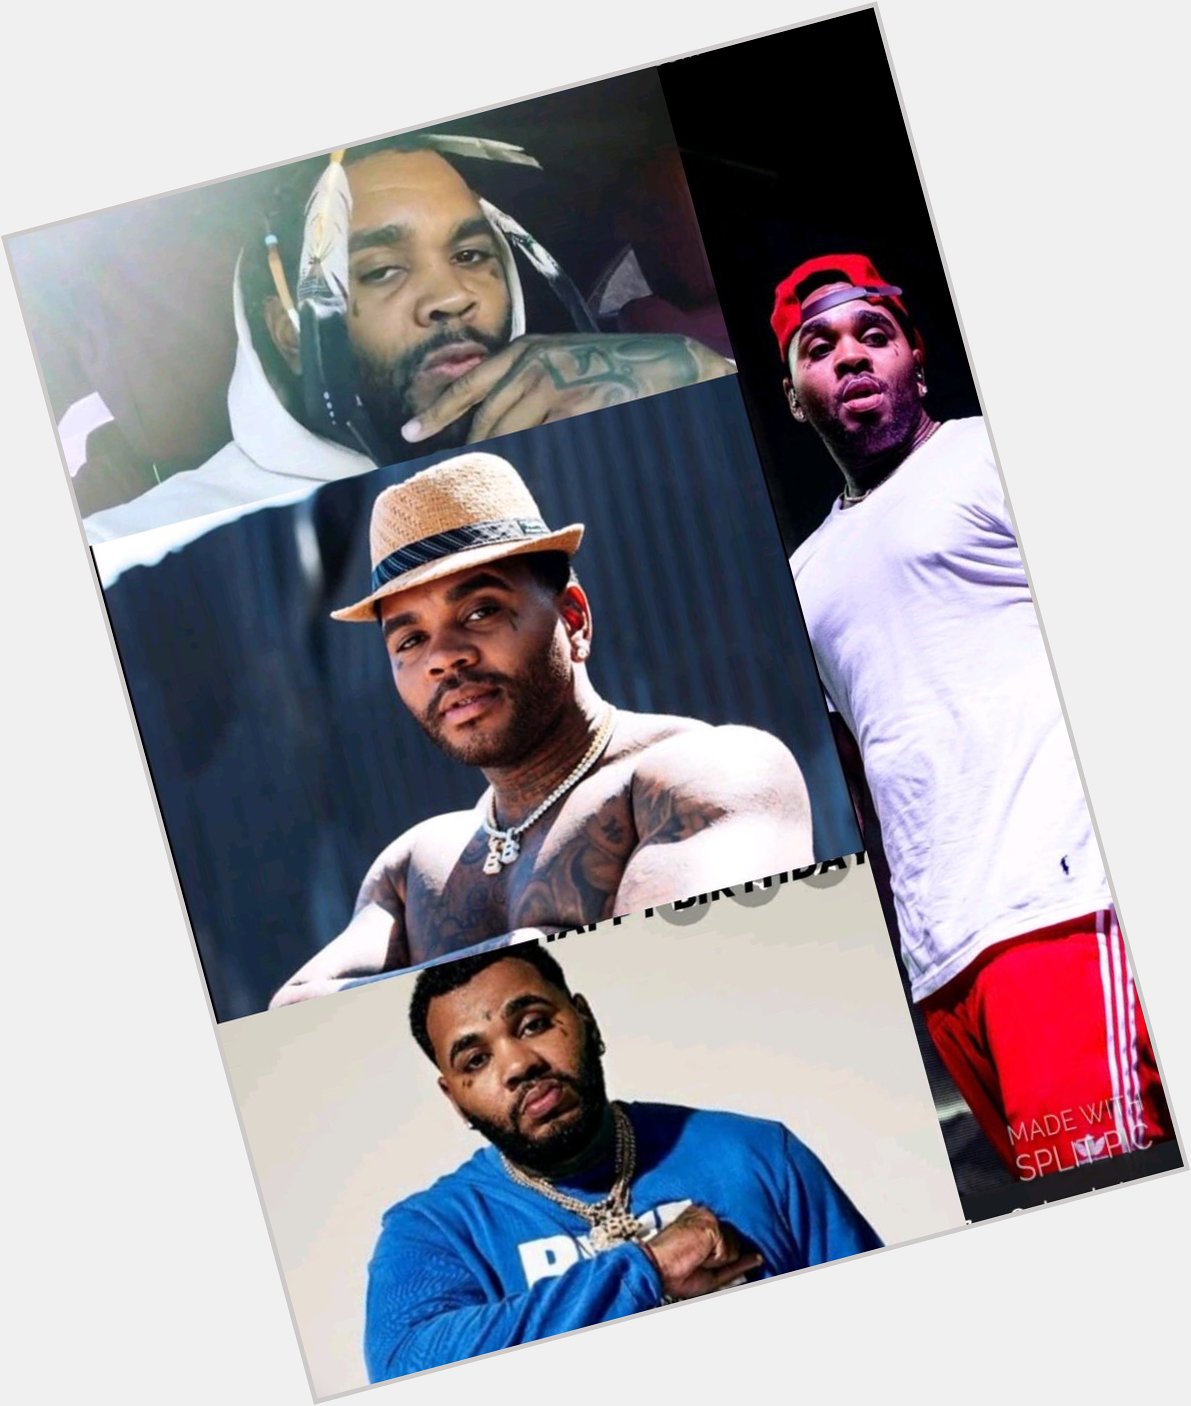 Happy belated birthday to the best rapper, my fave Kevin Gates 